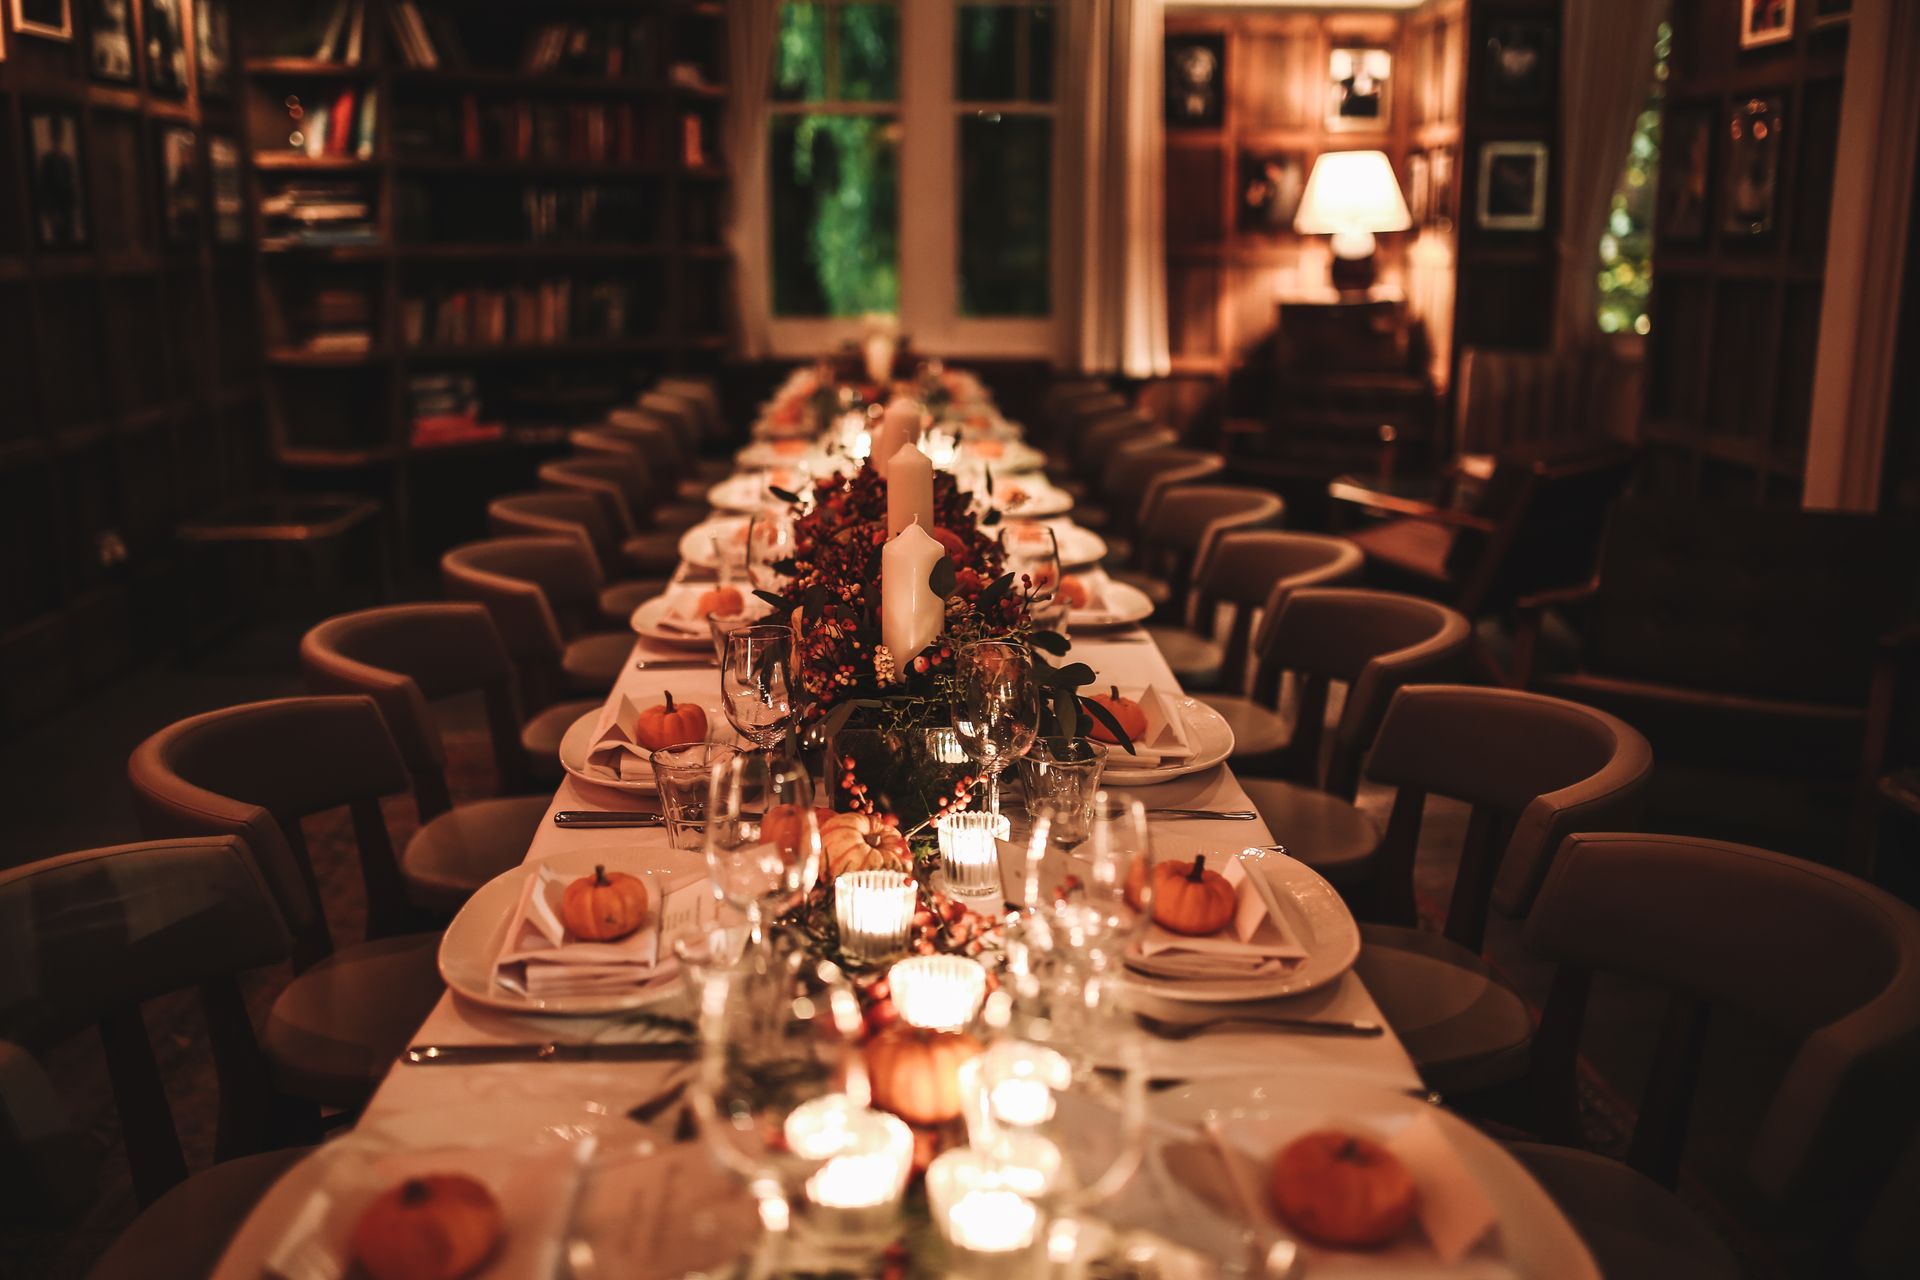 a long table with plates, glasses, candles and pumpkins on it